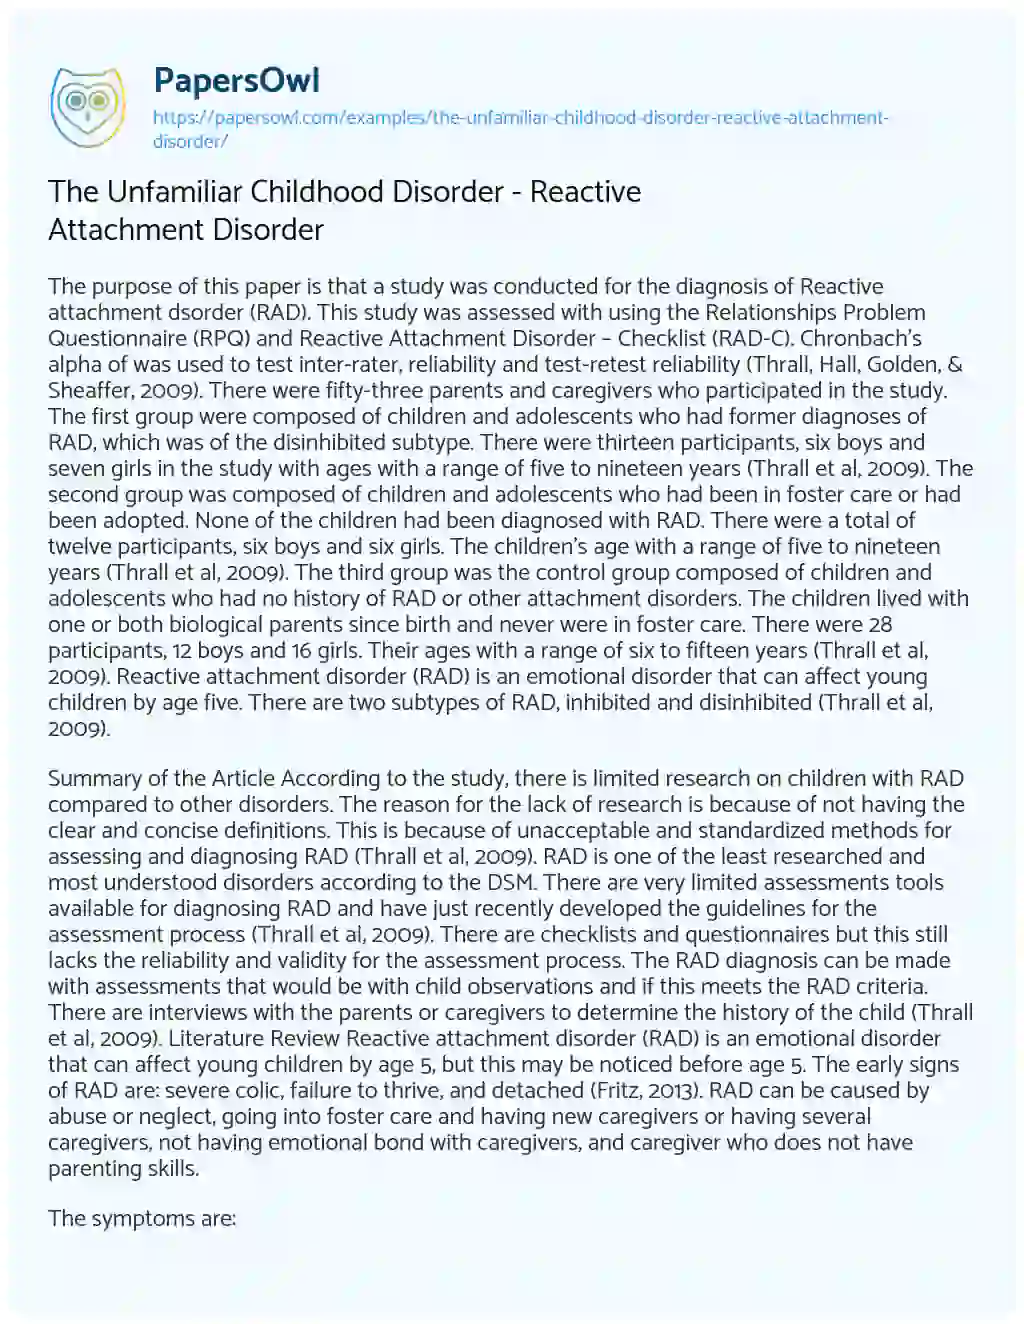 The Unfamiliar Childhood Disorder – Reactive Attachment Disorder essay